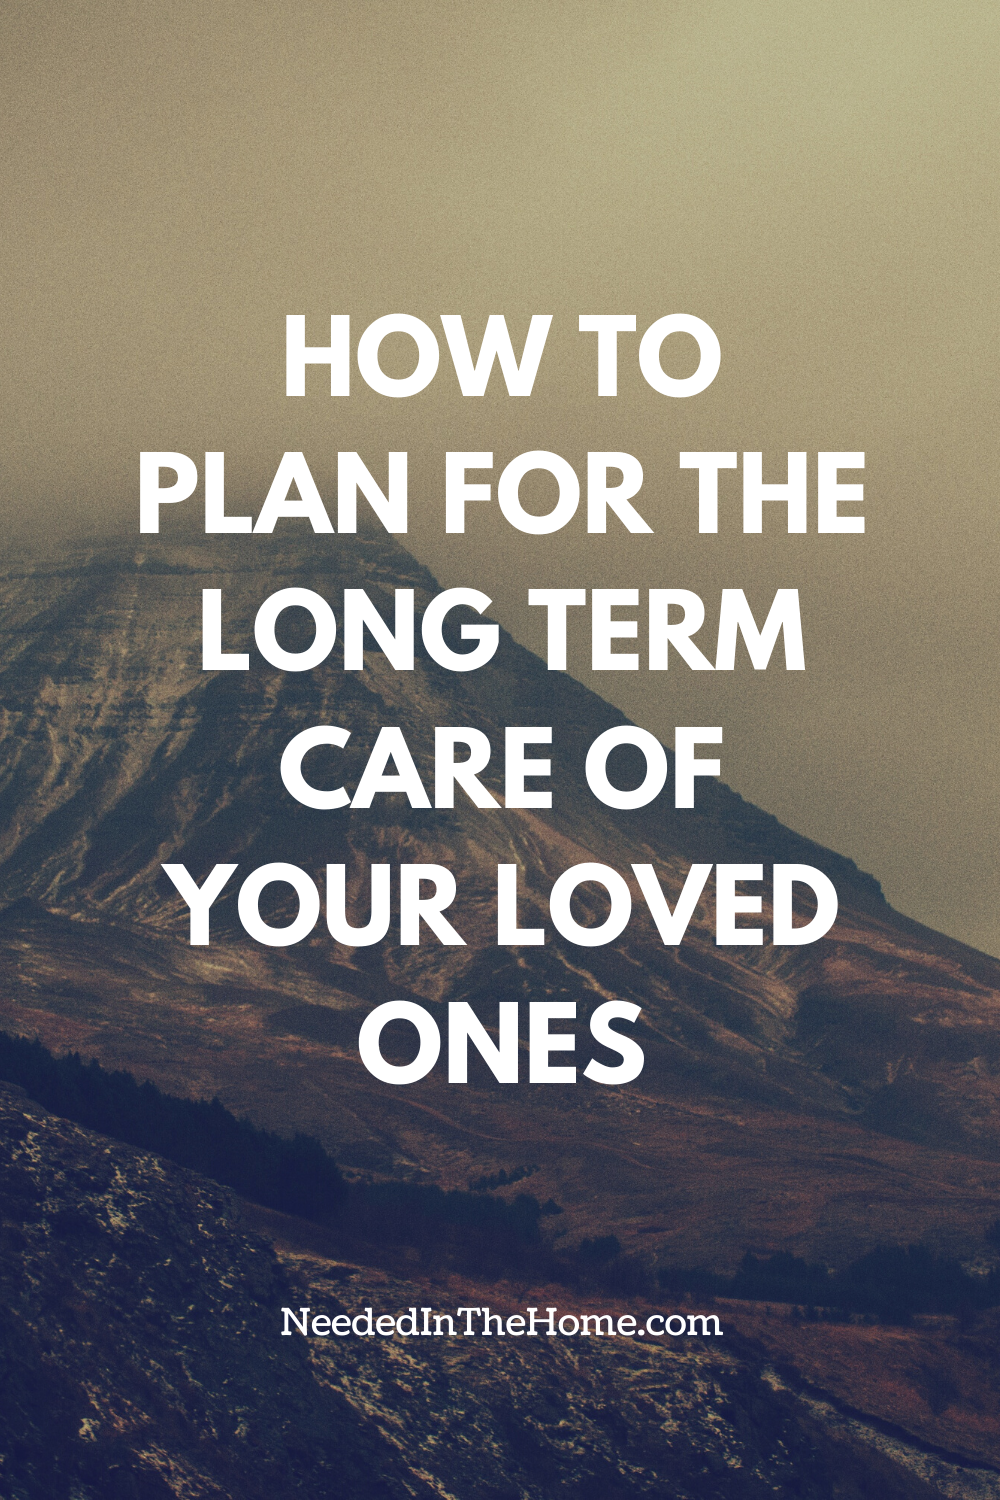 pinterest-pin-description how to plan for the long term care of your loved ones mountain view neededinthehome